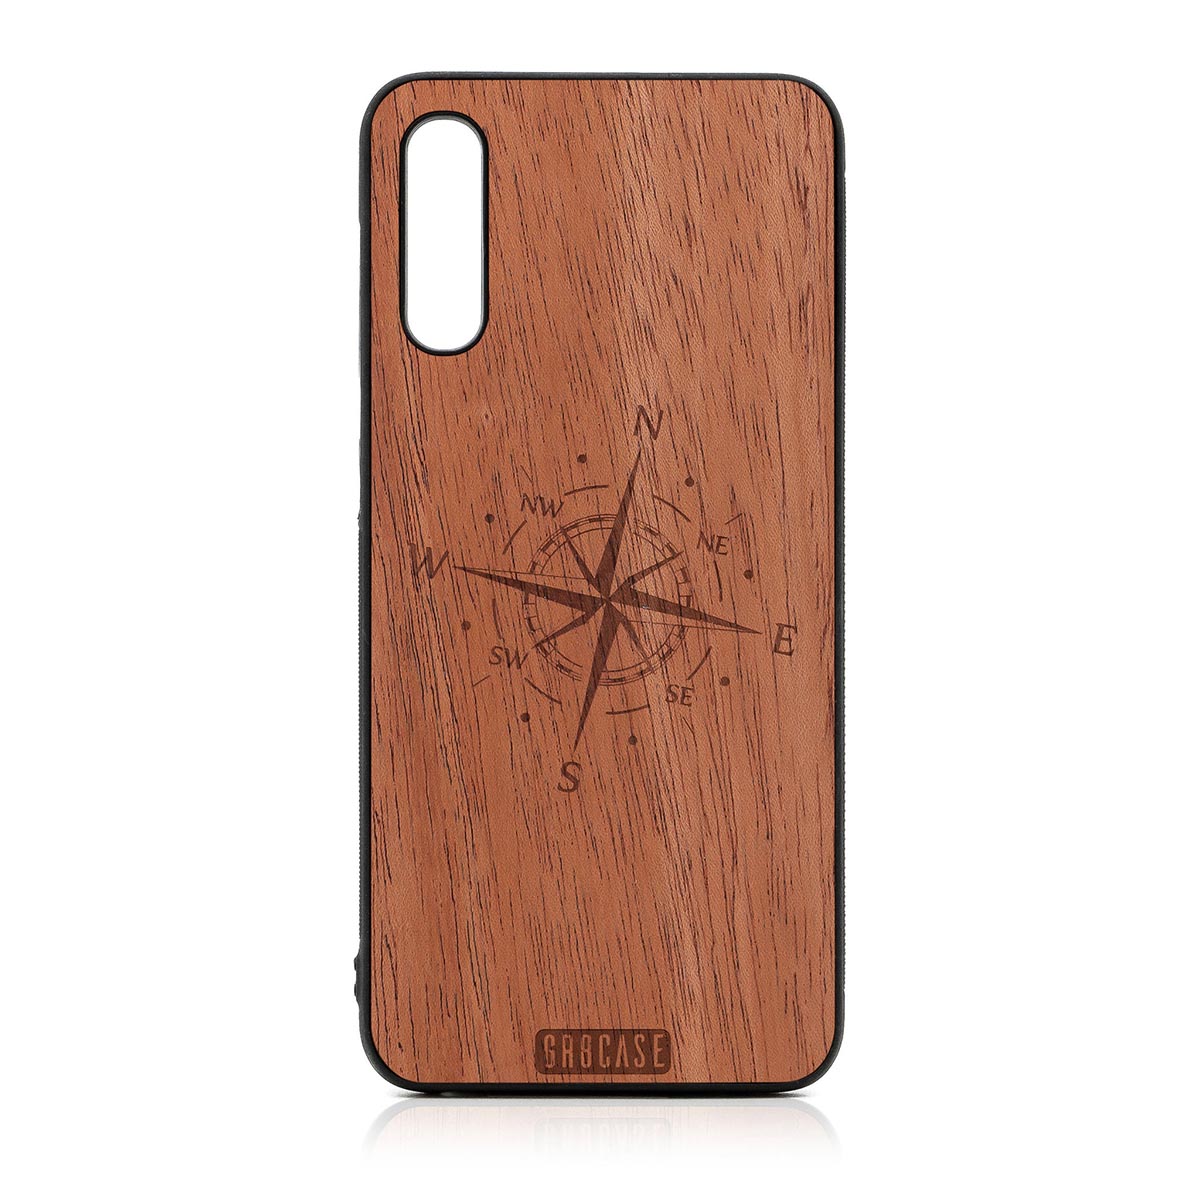 Compass Design Wood Case For Samsung Galaxy A50 by GR8CASE